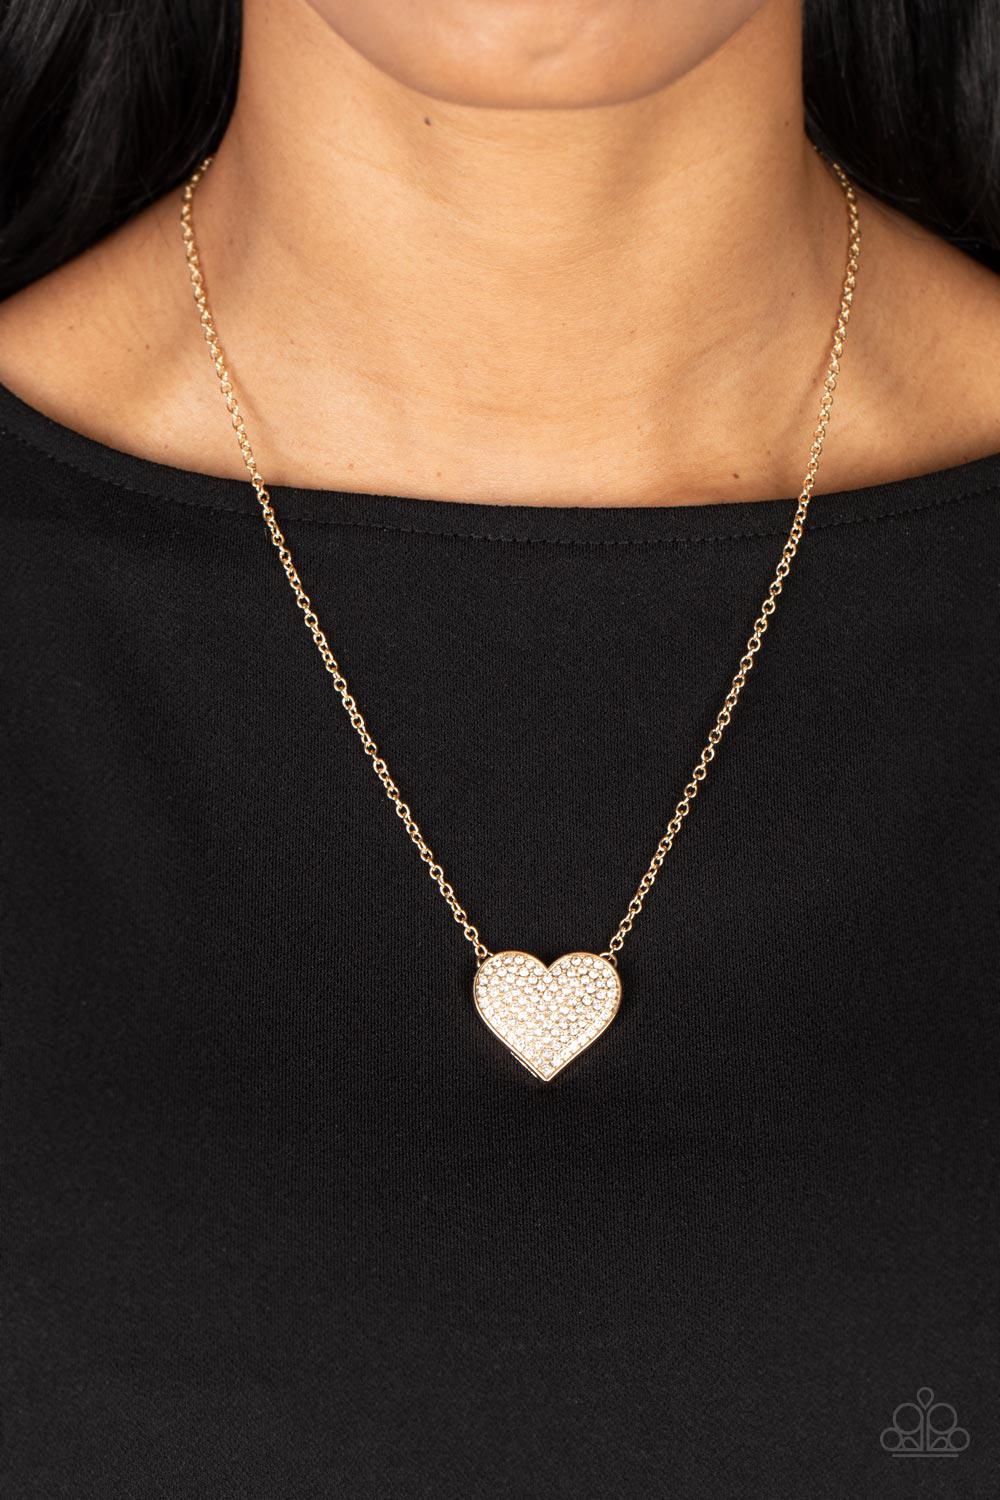 Spellbinding Sweetheart Gold & White Rhinestone Heart Necklace - Paparazzi Accessories- lightbox - CarasShop.com - $5 Jewelry by Cara Jewels